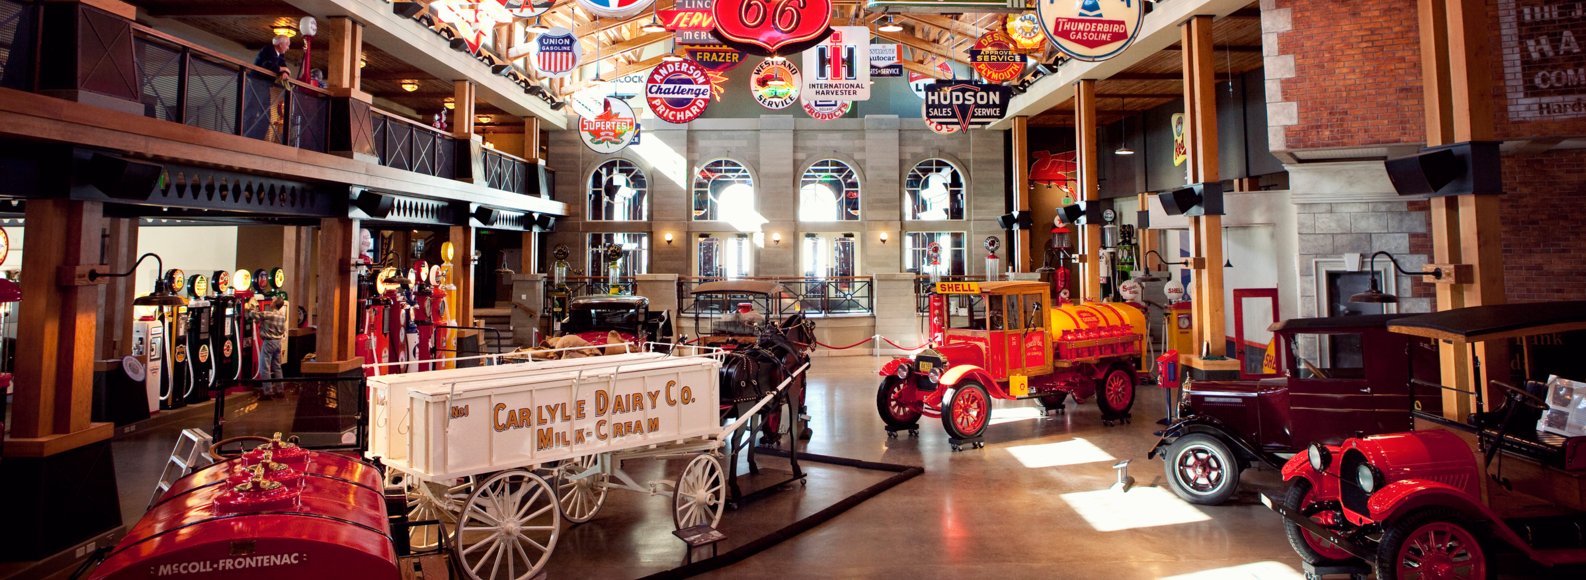 Interior view of a museum filled with old cars and gas station signage.